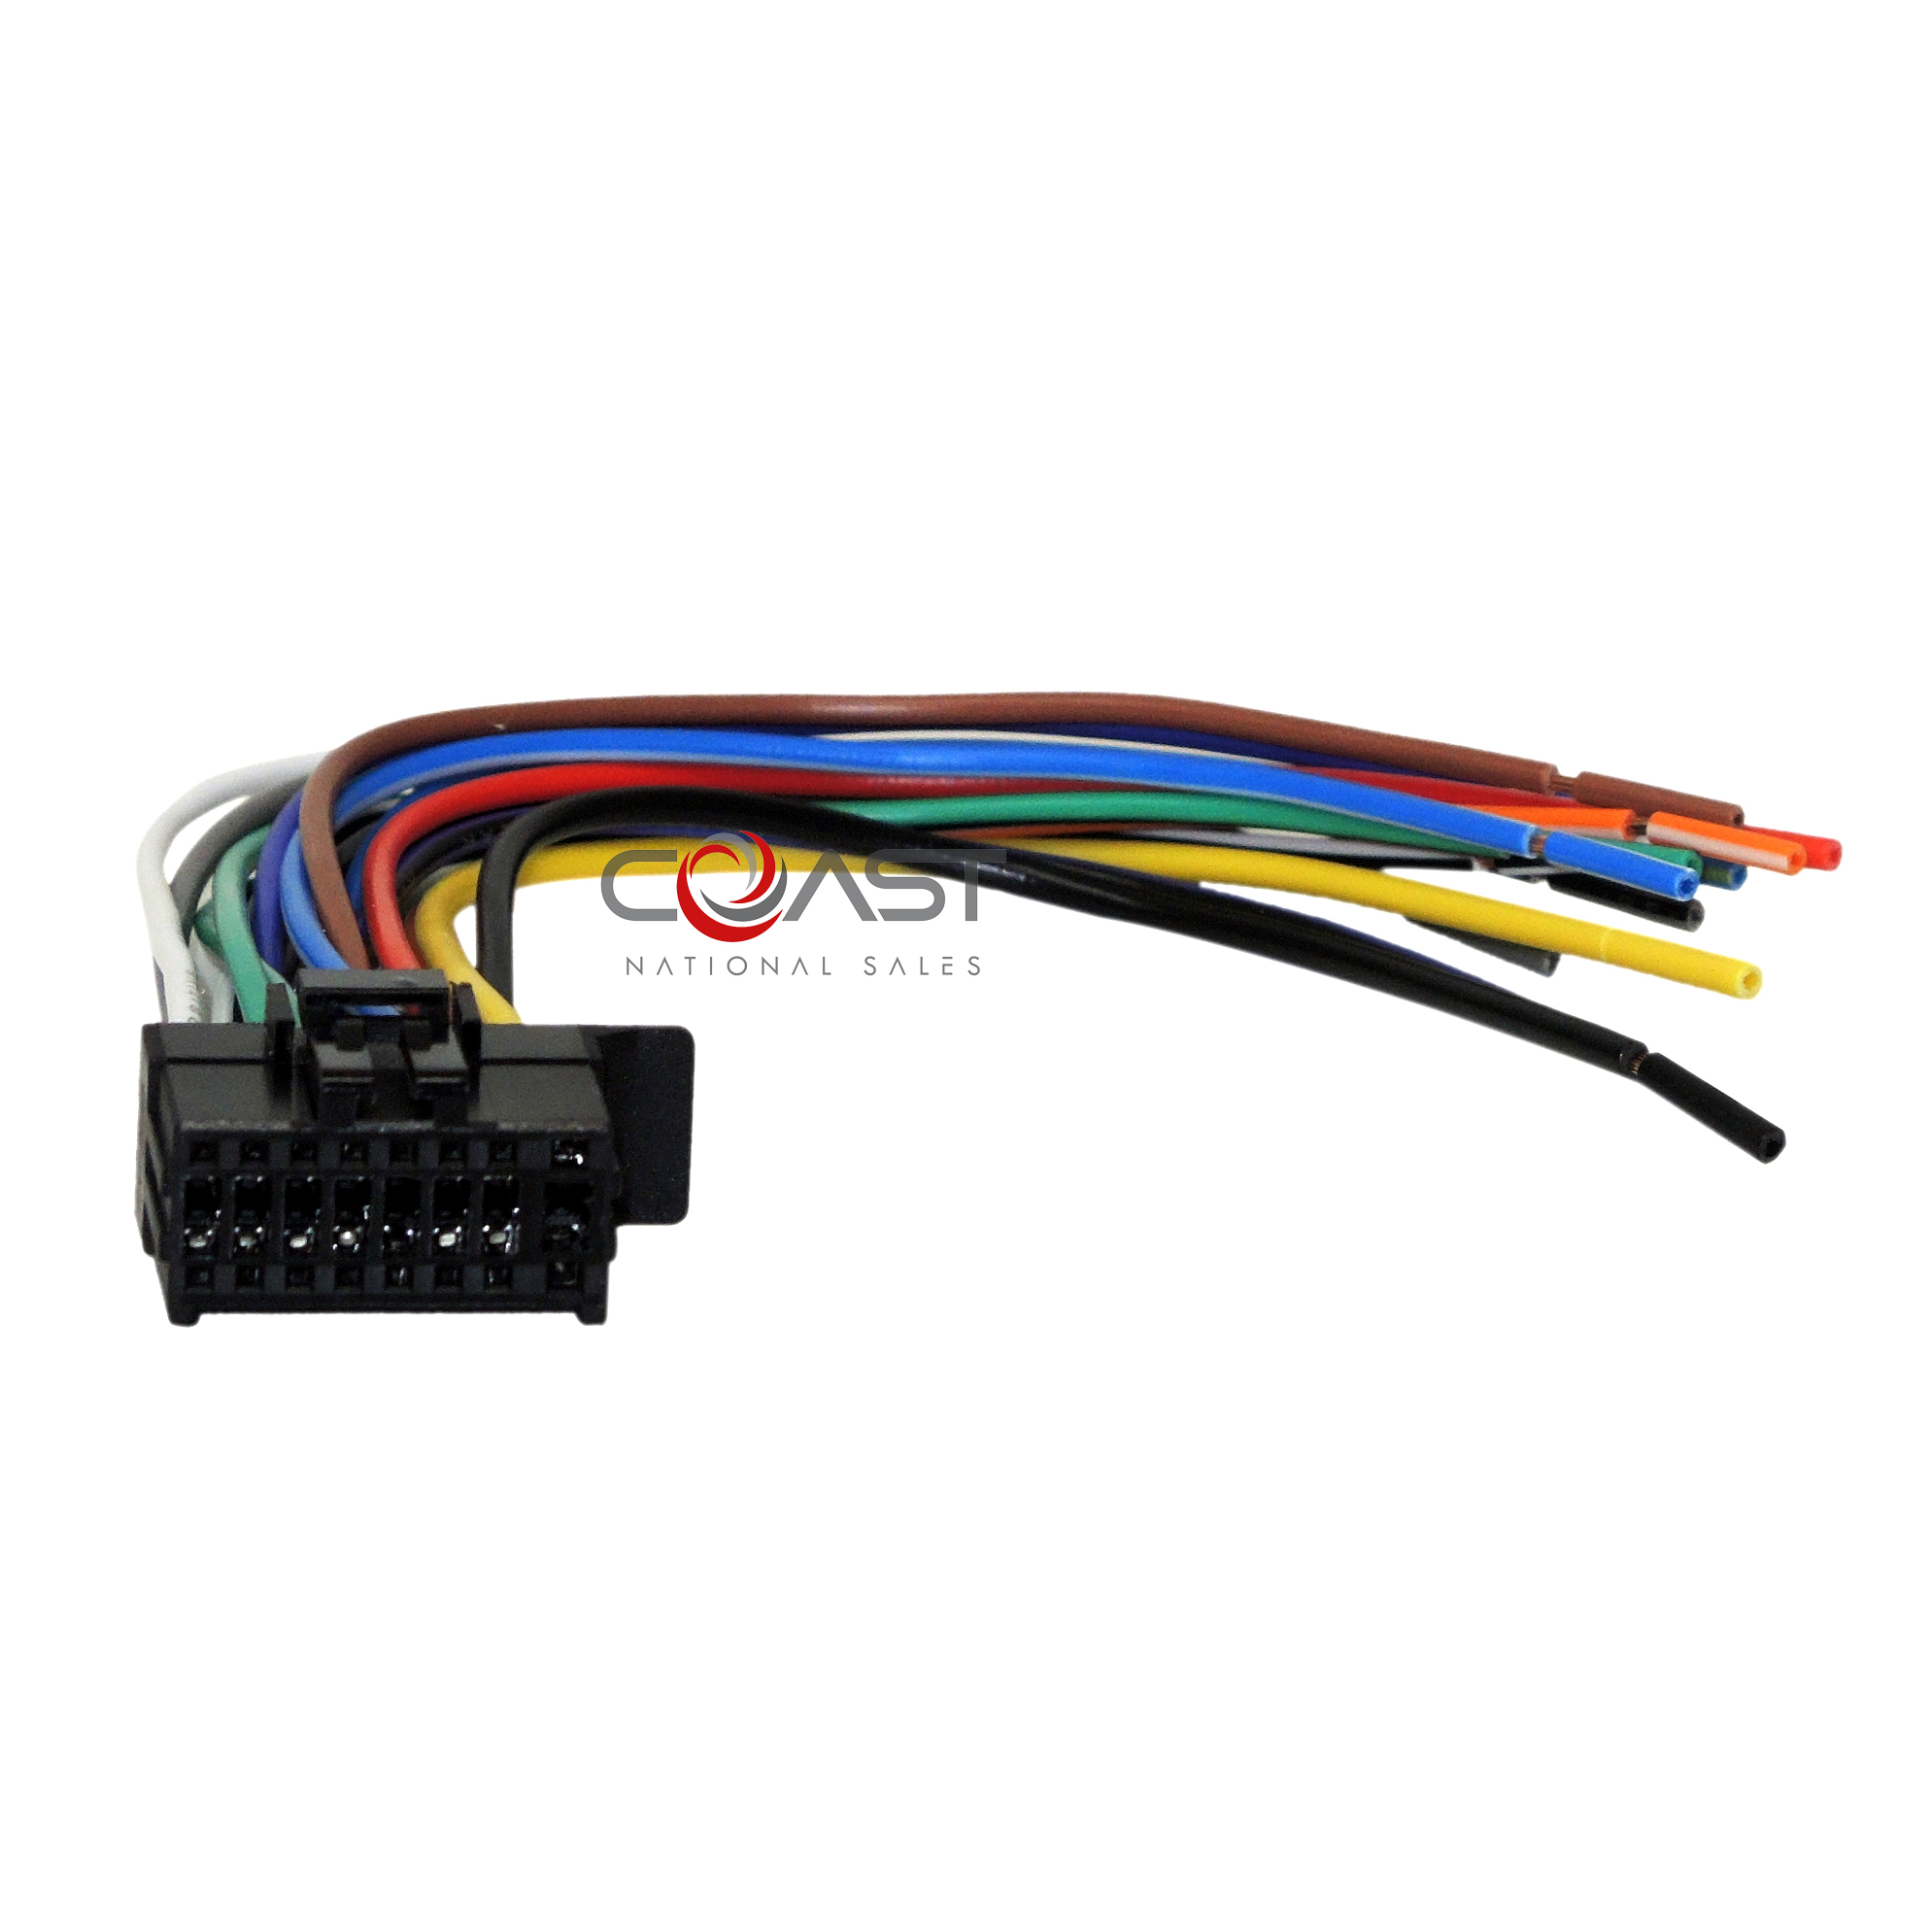 43 Wiring Harness For Kenwood Car Stereo - Wiring Diagram Source Online